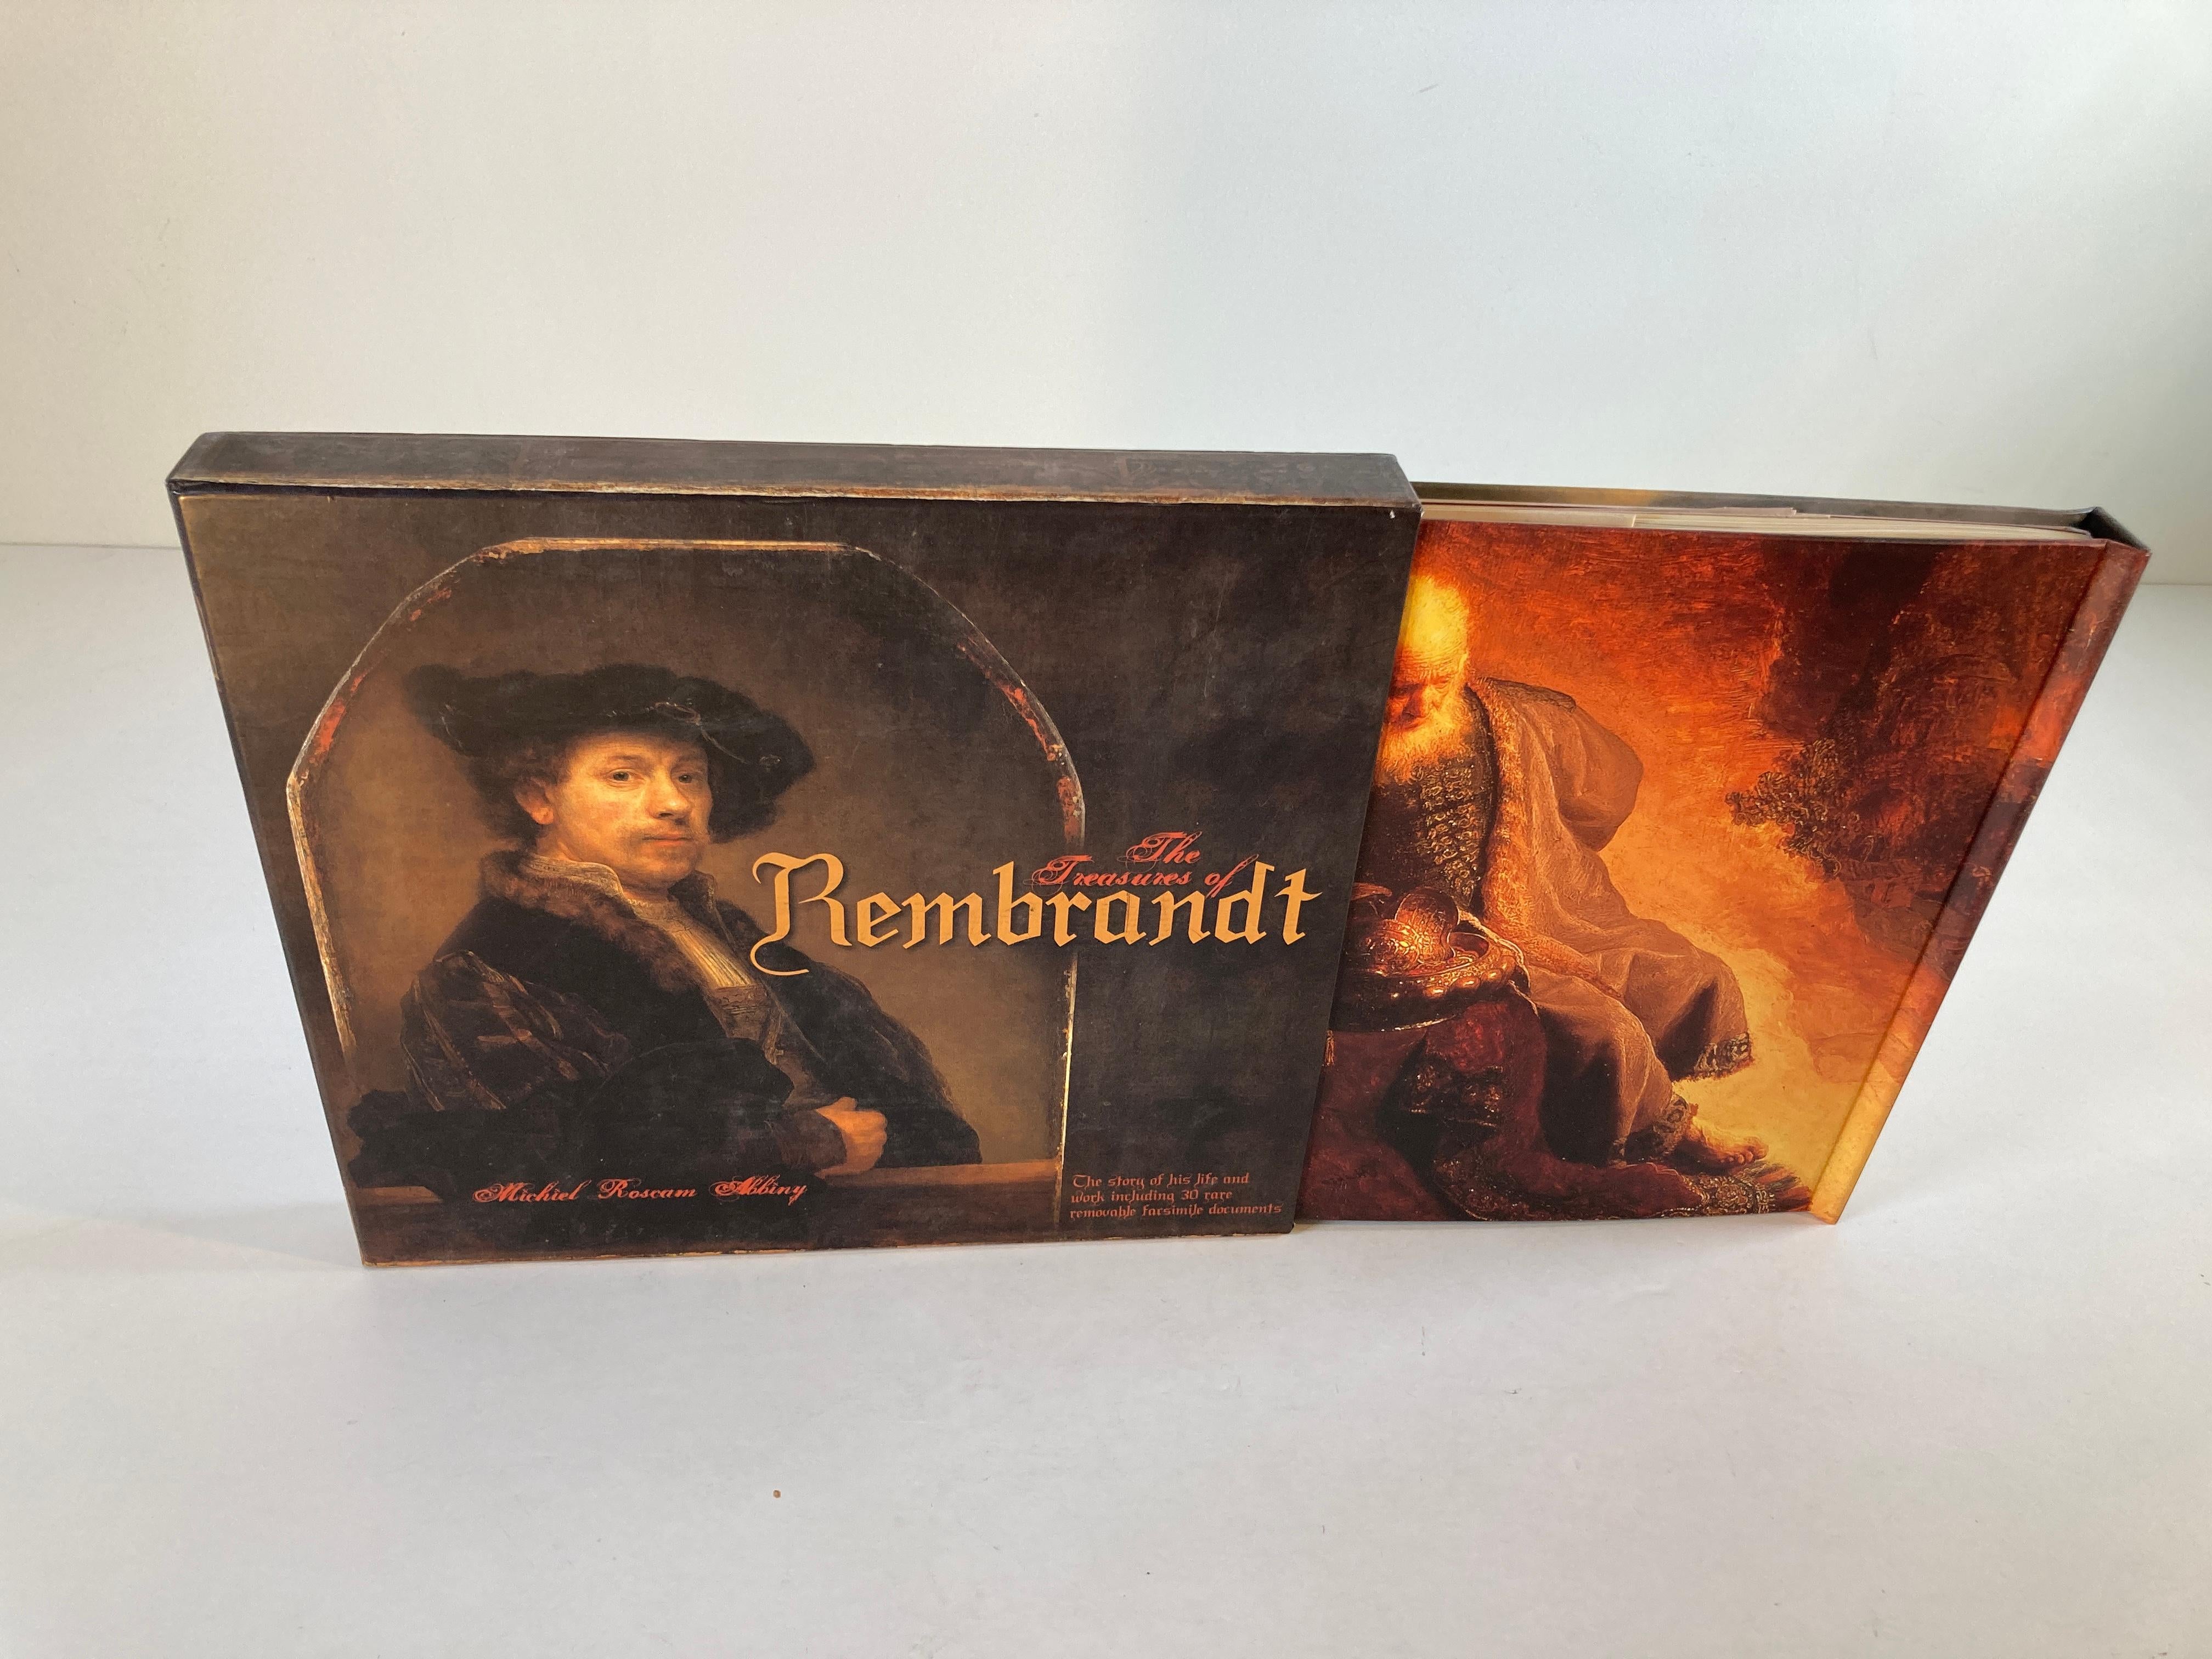 Baroque The Treasures of Rembrandt Book by Michiel Roscam Abbing Art Gallery Book For Sale